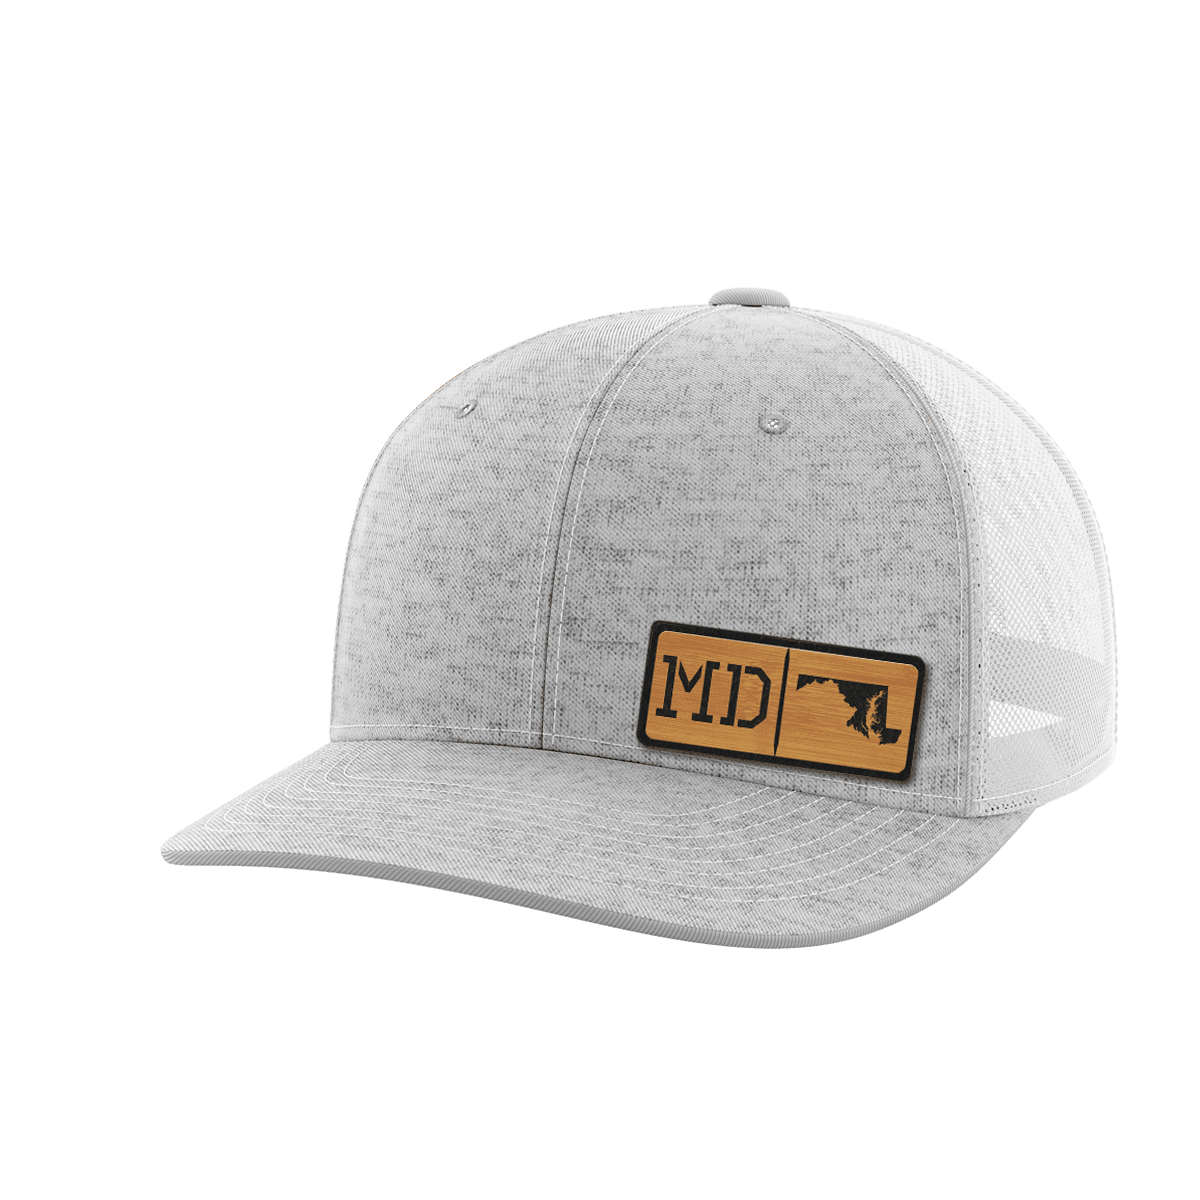 Maryland Homegrown Hats - Greater Half